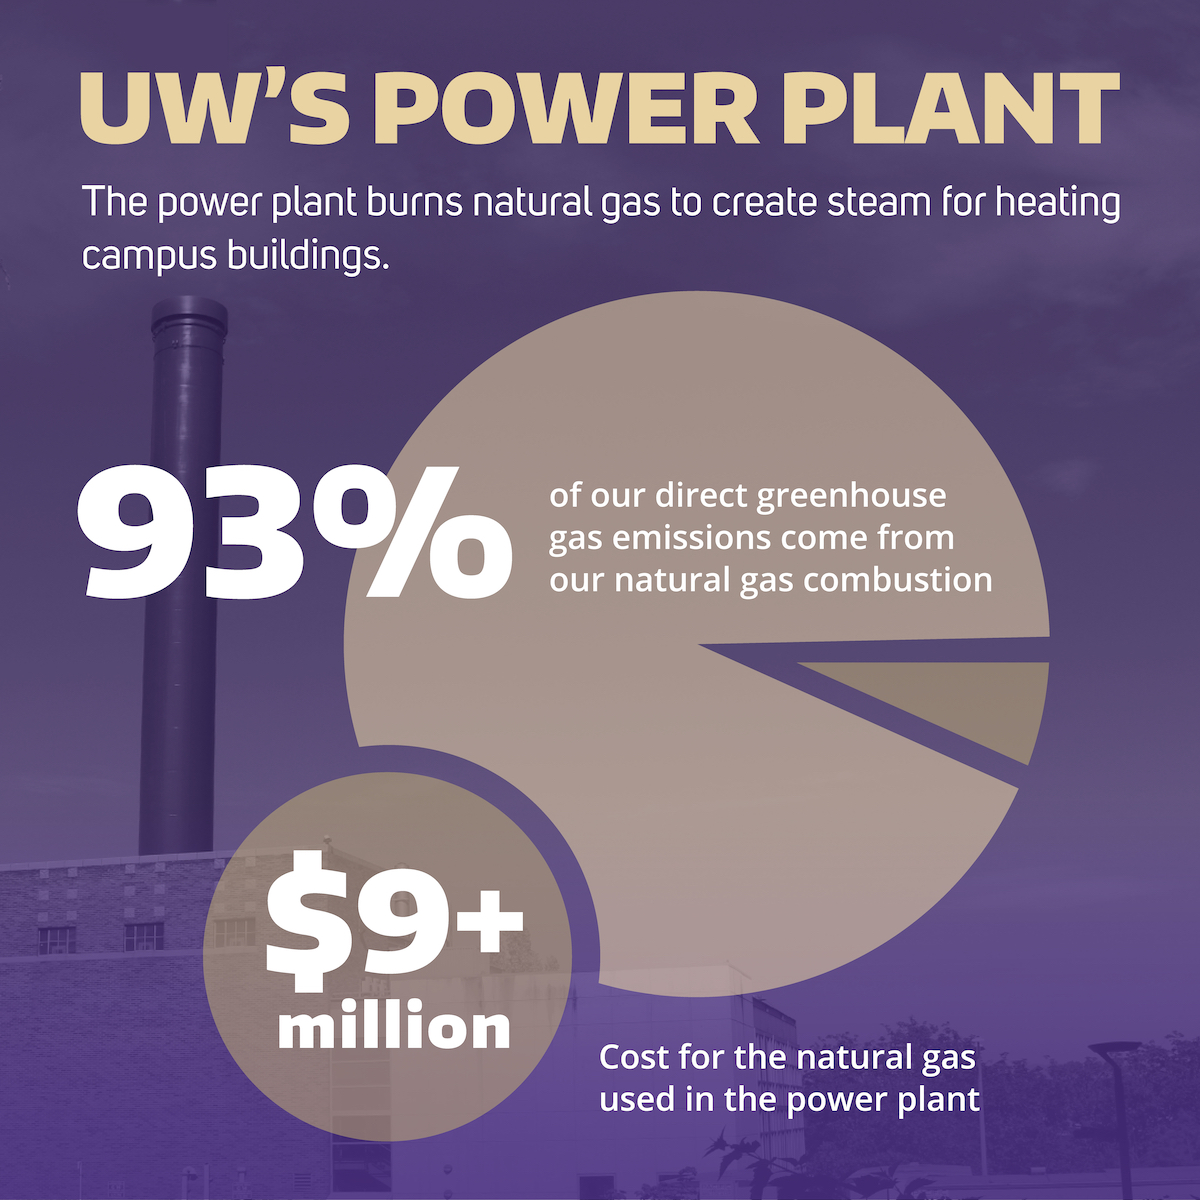 Infographic showing that 93% of UW's direct greenhouse gas emissions come from the natural gas used in the Power Plant, which costs $9+ million each year